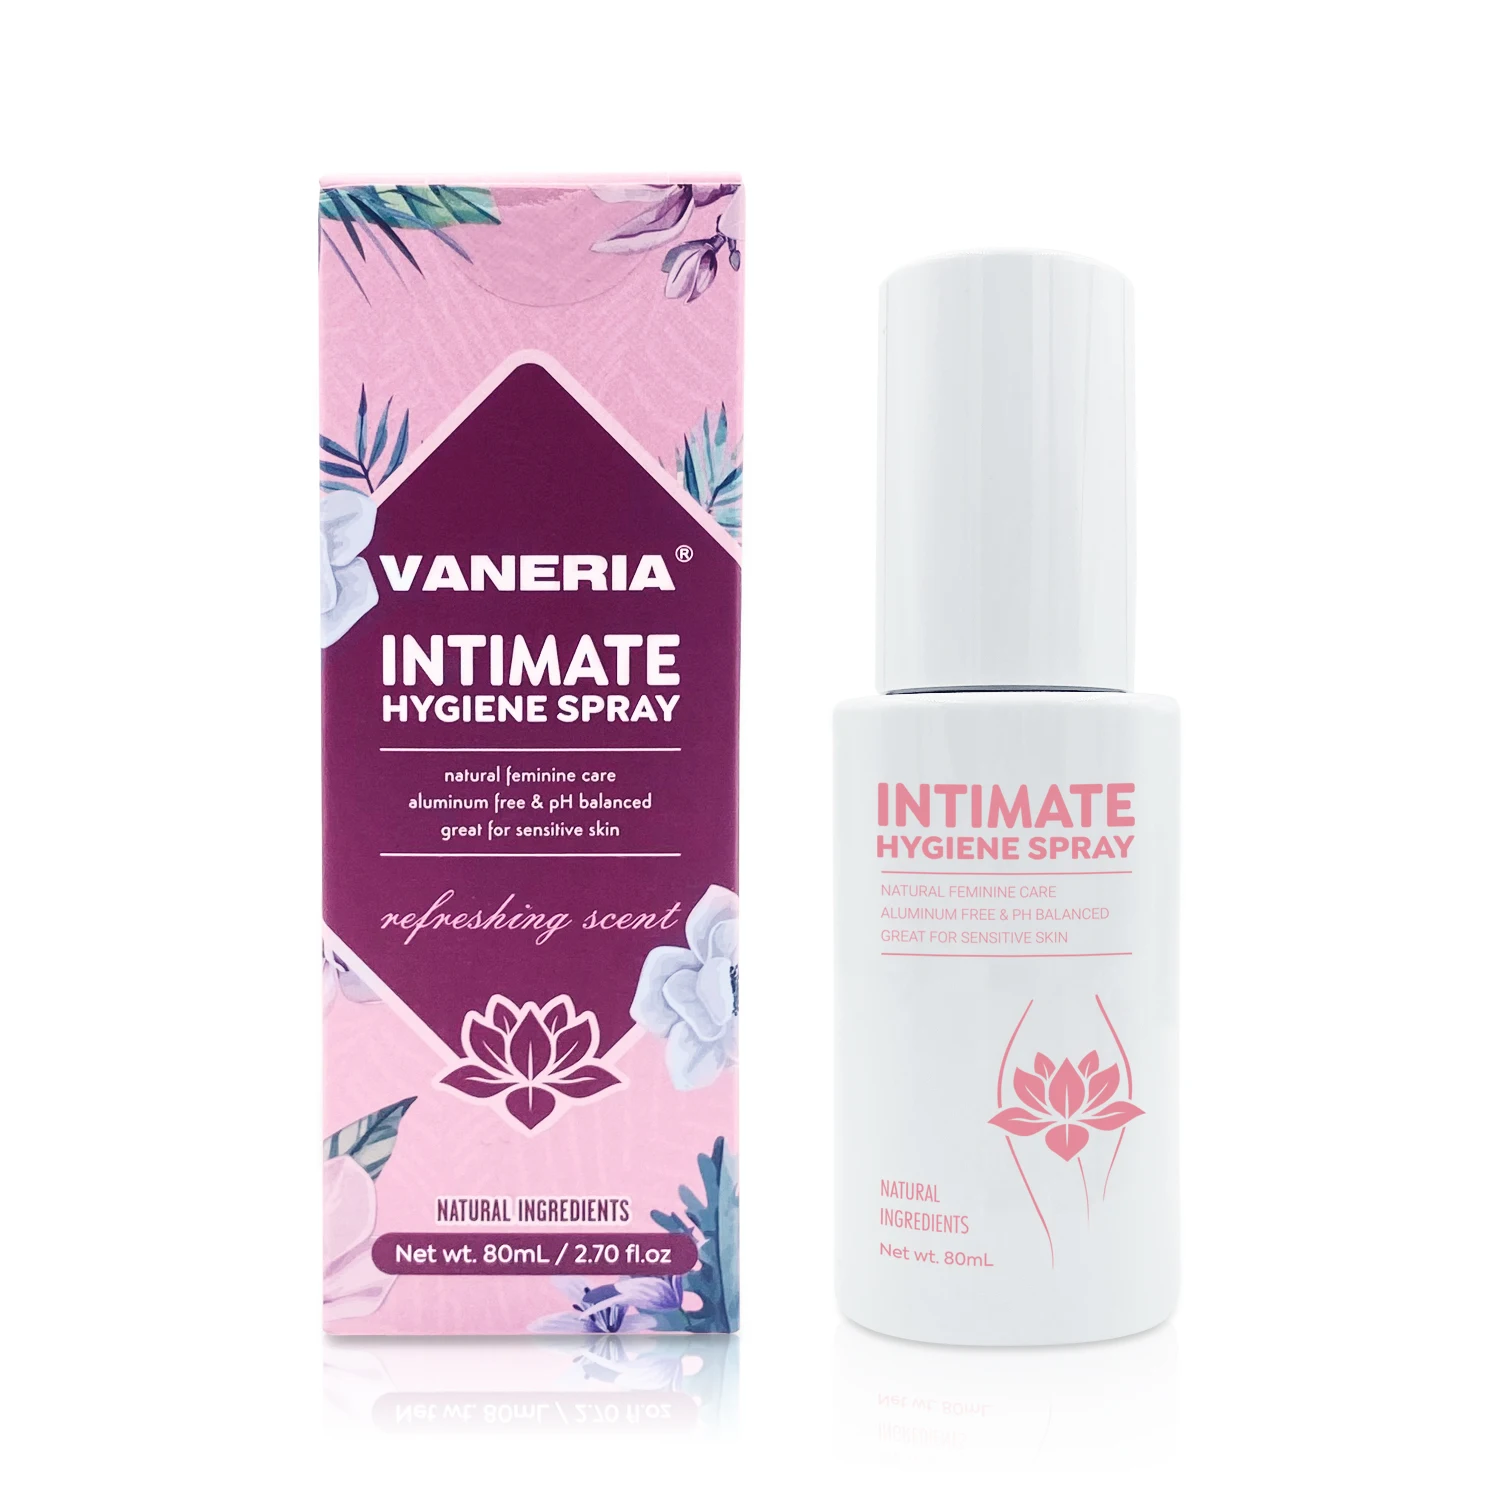 

Female Intimate Care Organic Herbal Extracts Remove Odor Anti Itching Yoni Spray Feminine Hygiene For Women